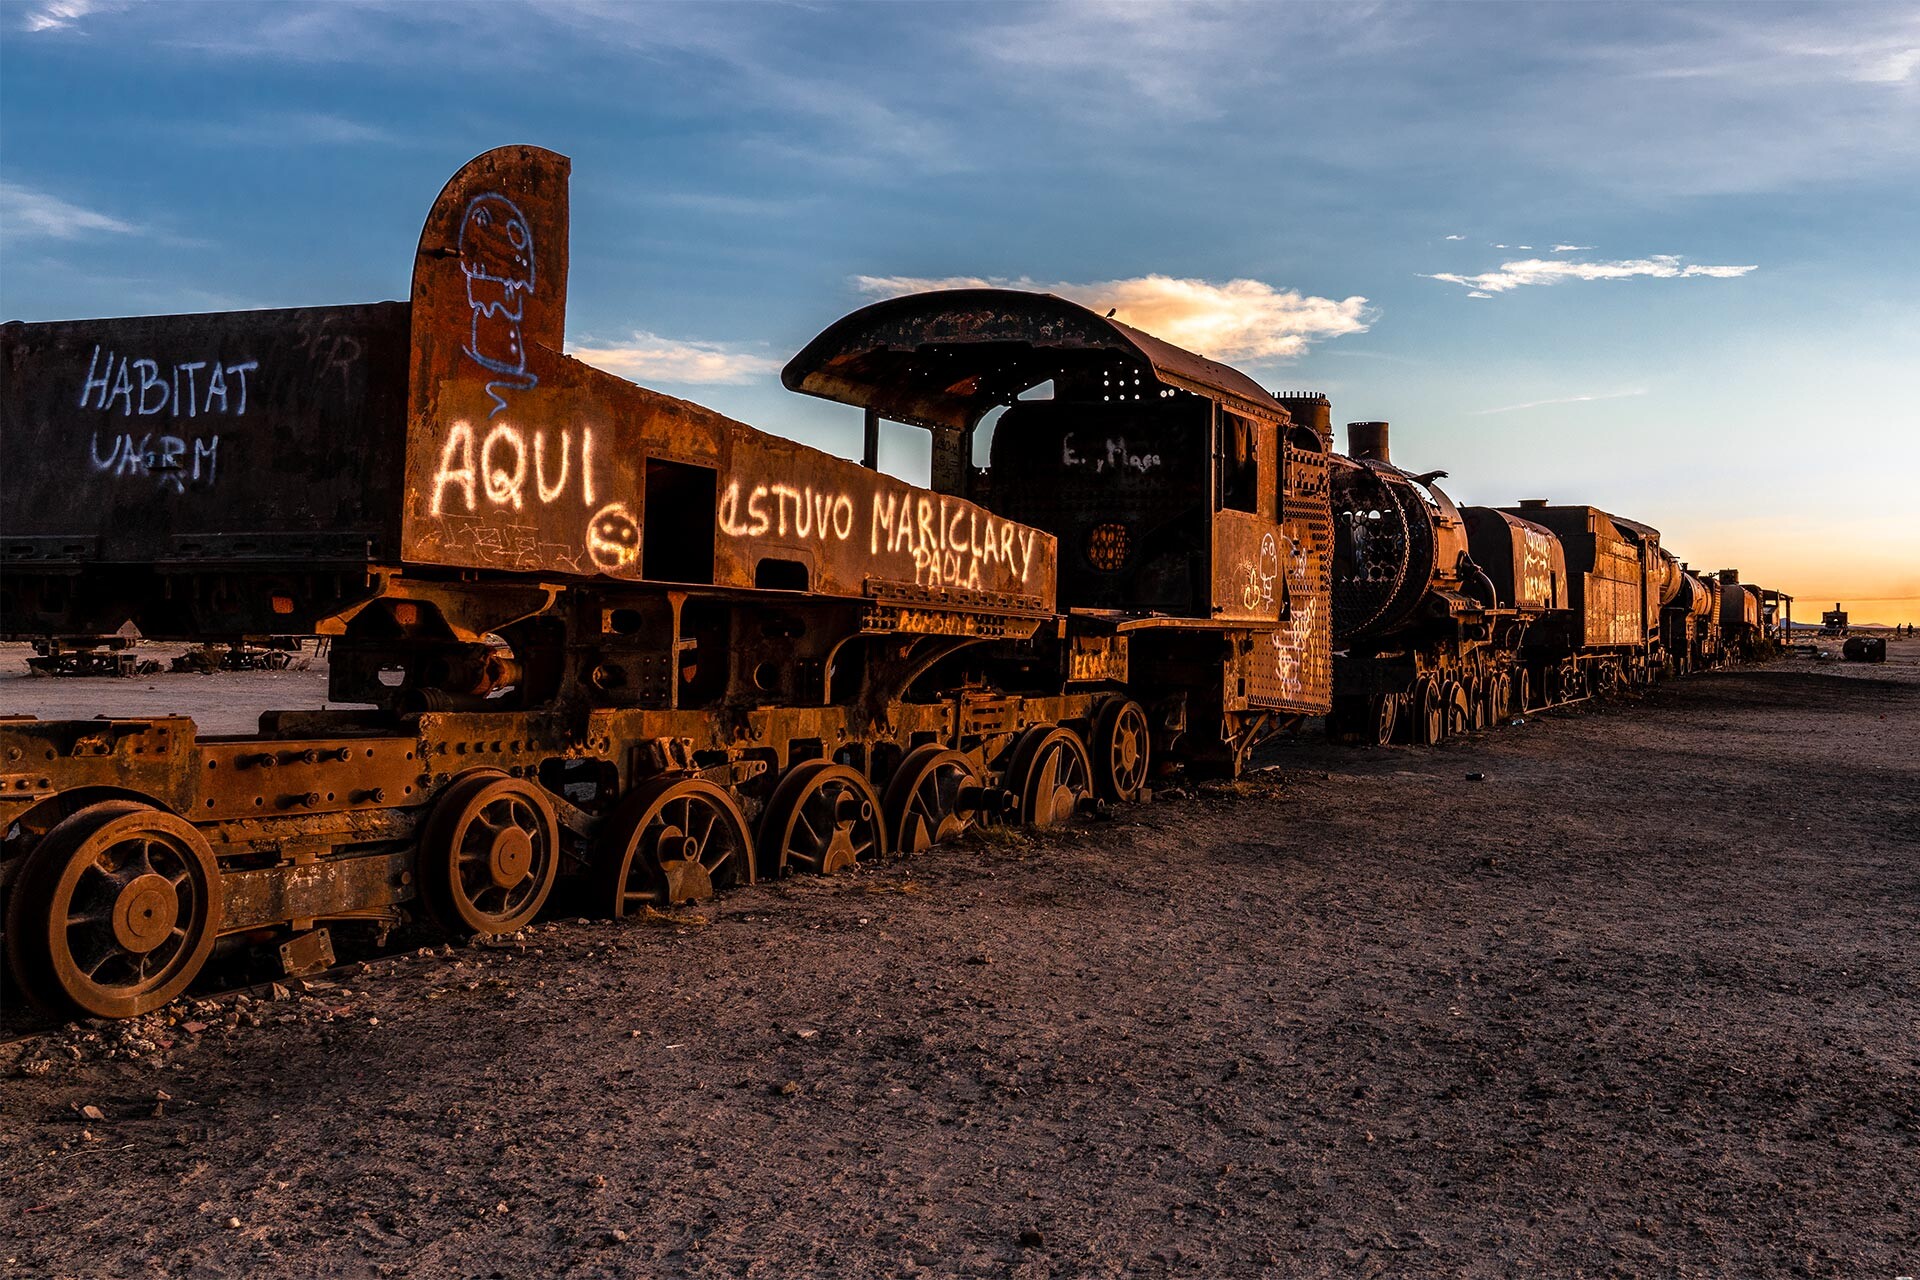 THE COUNTRY OF THE EXTREME - BOLIVIA 2018 - Part 3: Rusty Locomotives and the Flamingo Invasion